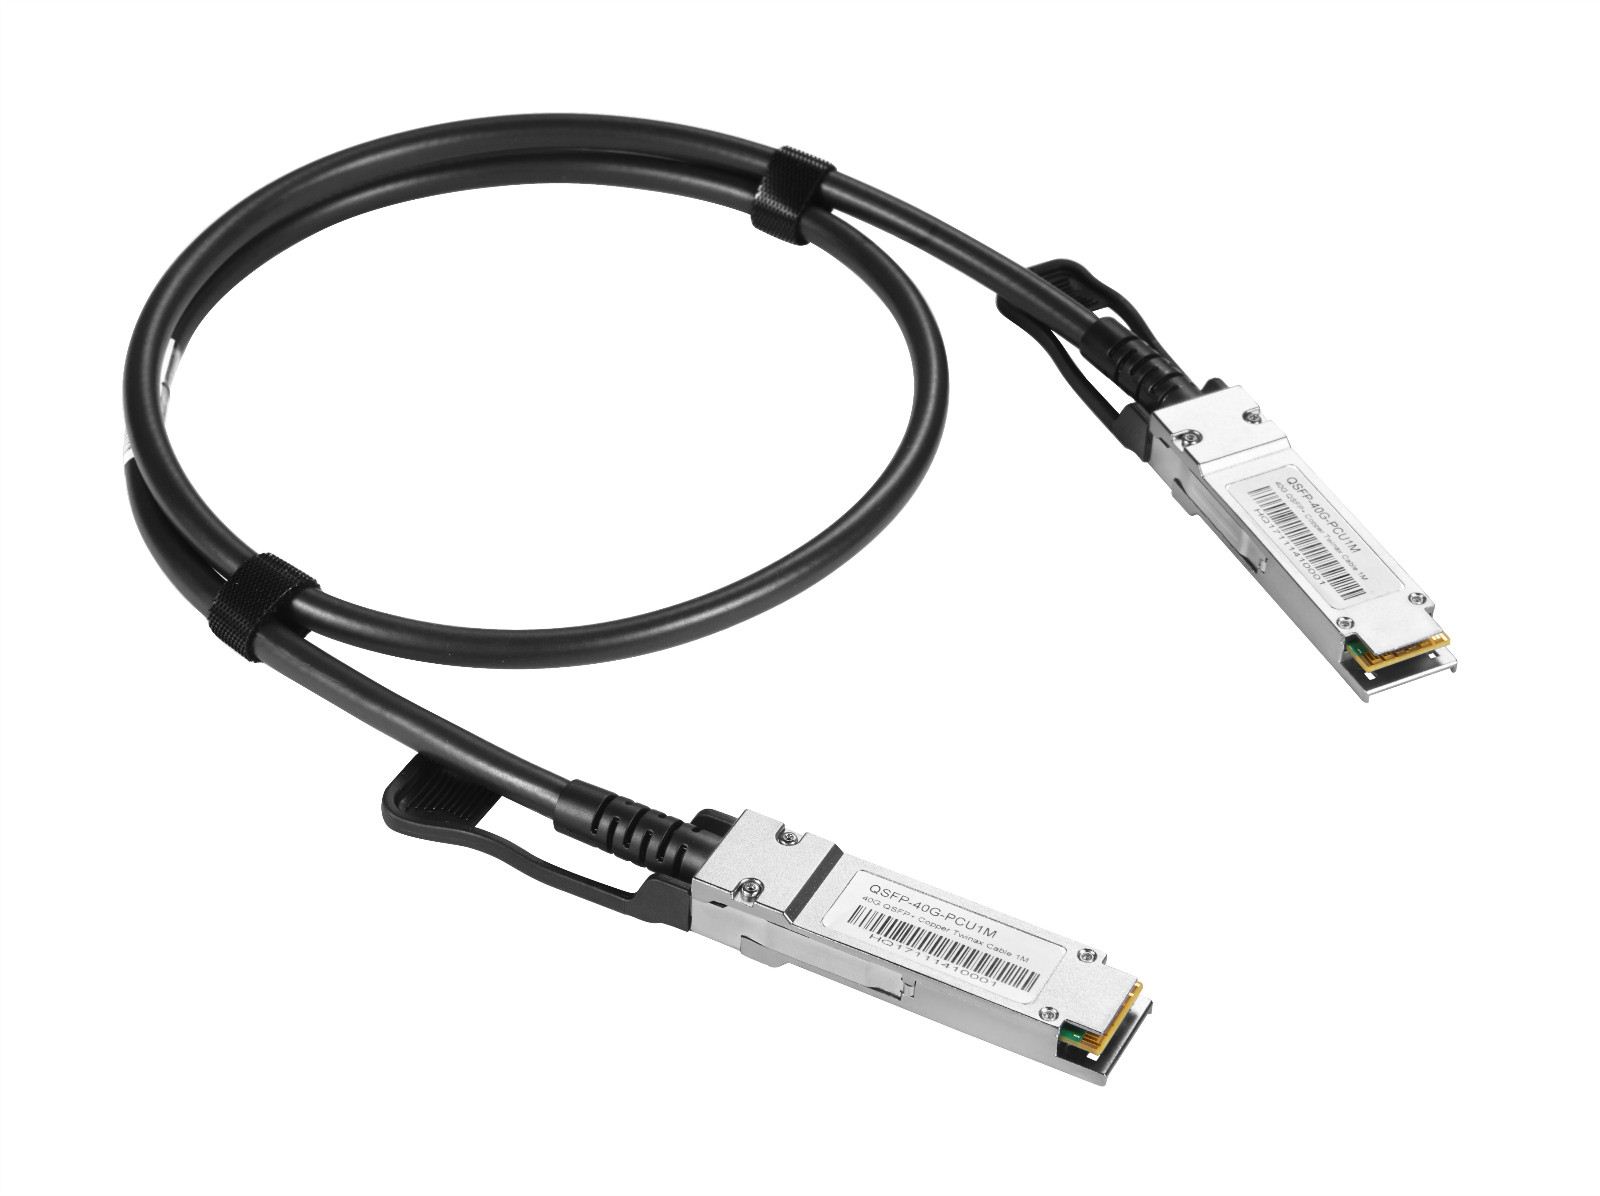 Come here,HTD-Infor has Direct Attach Cables that meets you